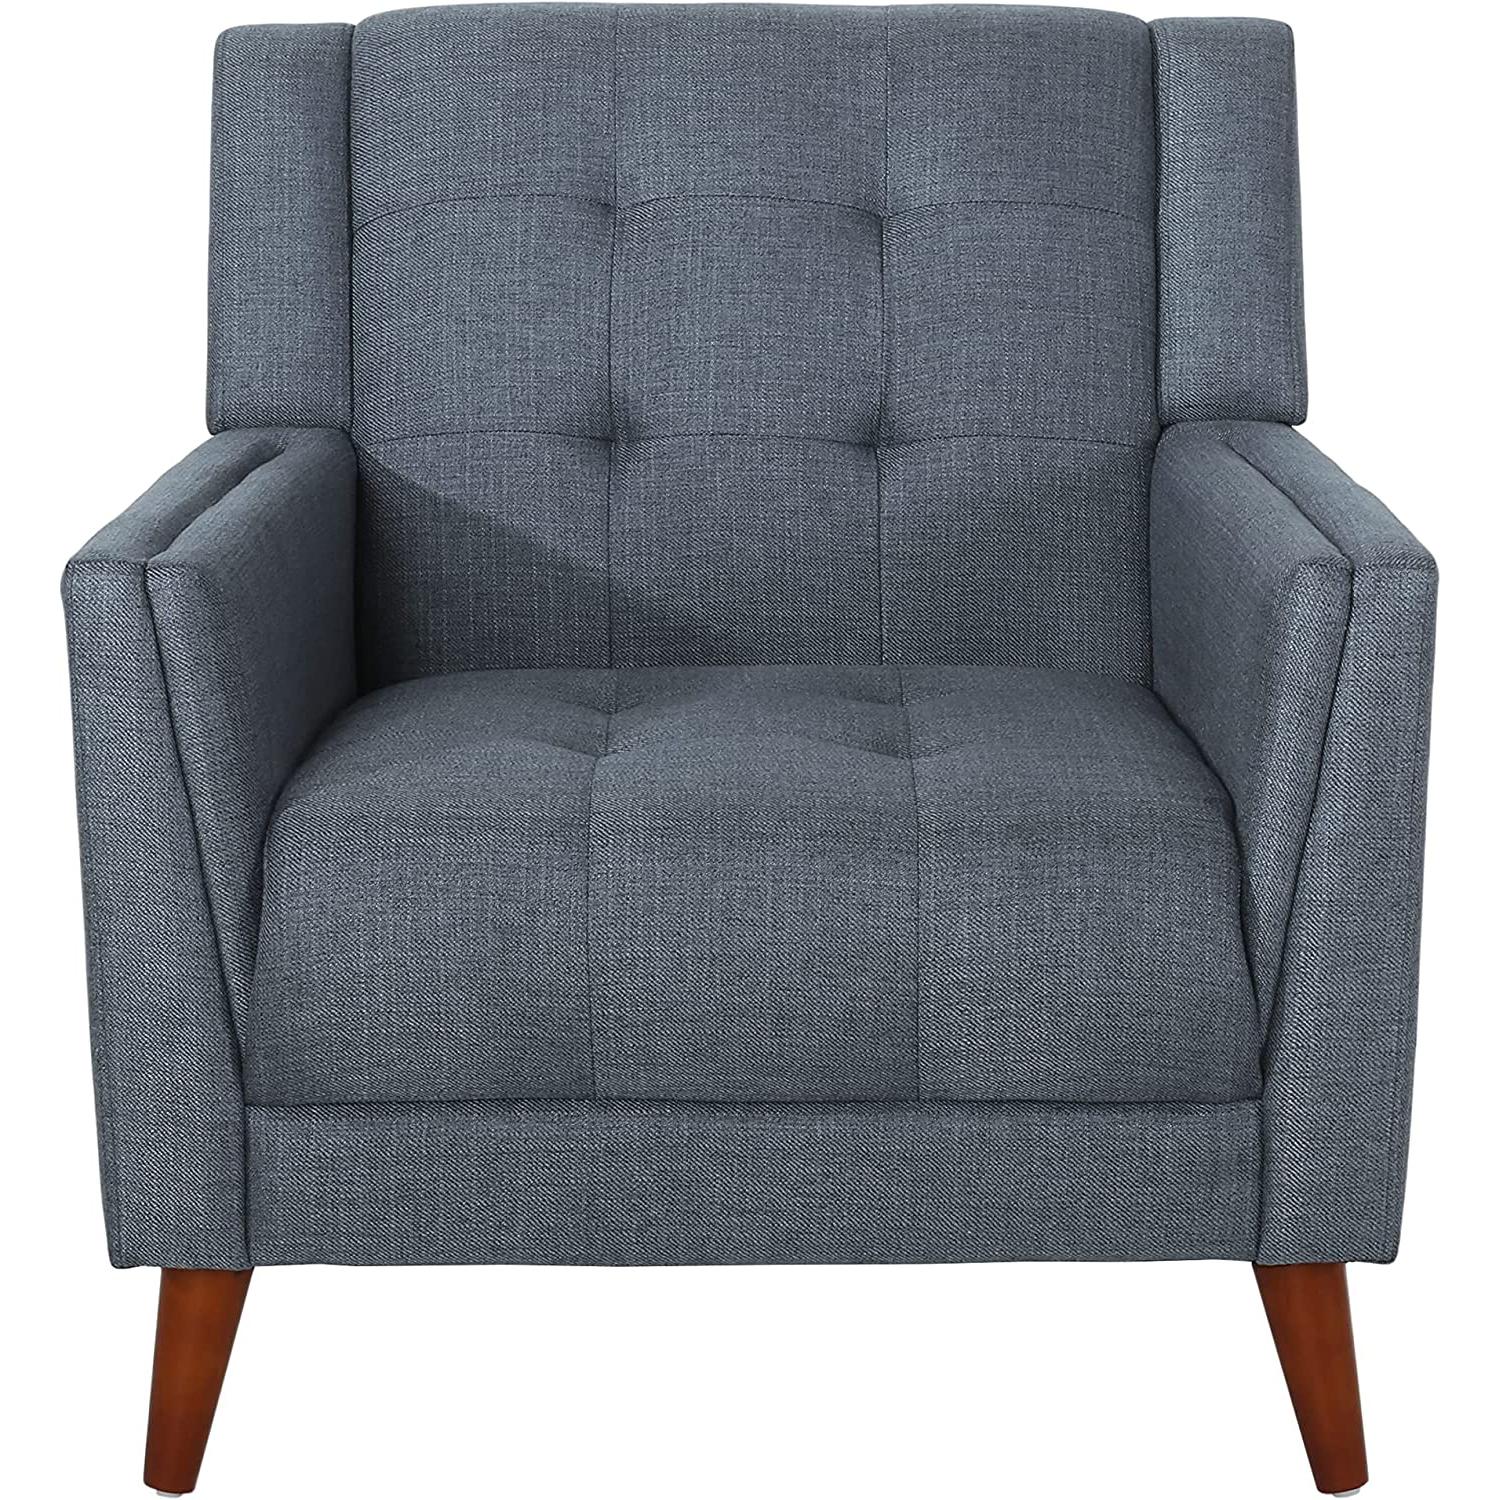 Christopher Knight Home Evelyn Mid Modern Fabric Arm Chair for $146.48 Shipped